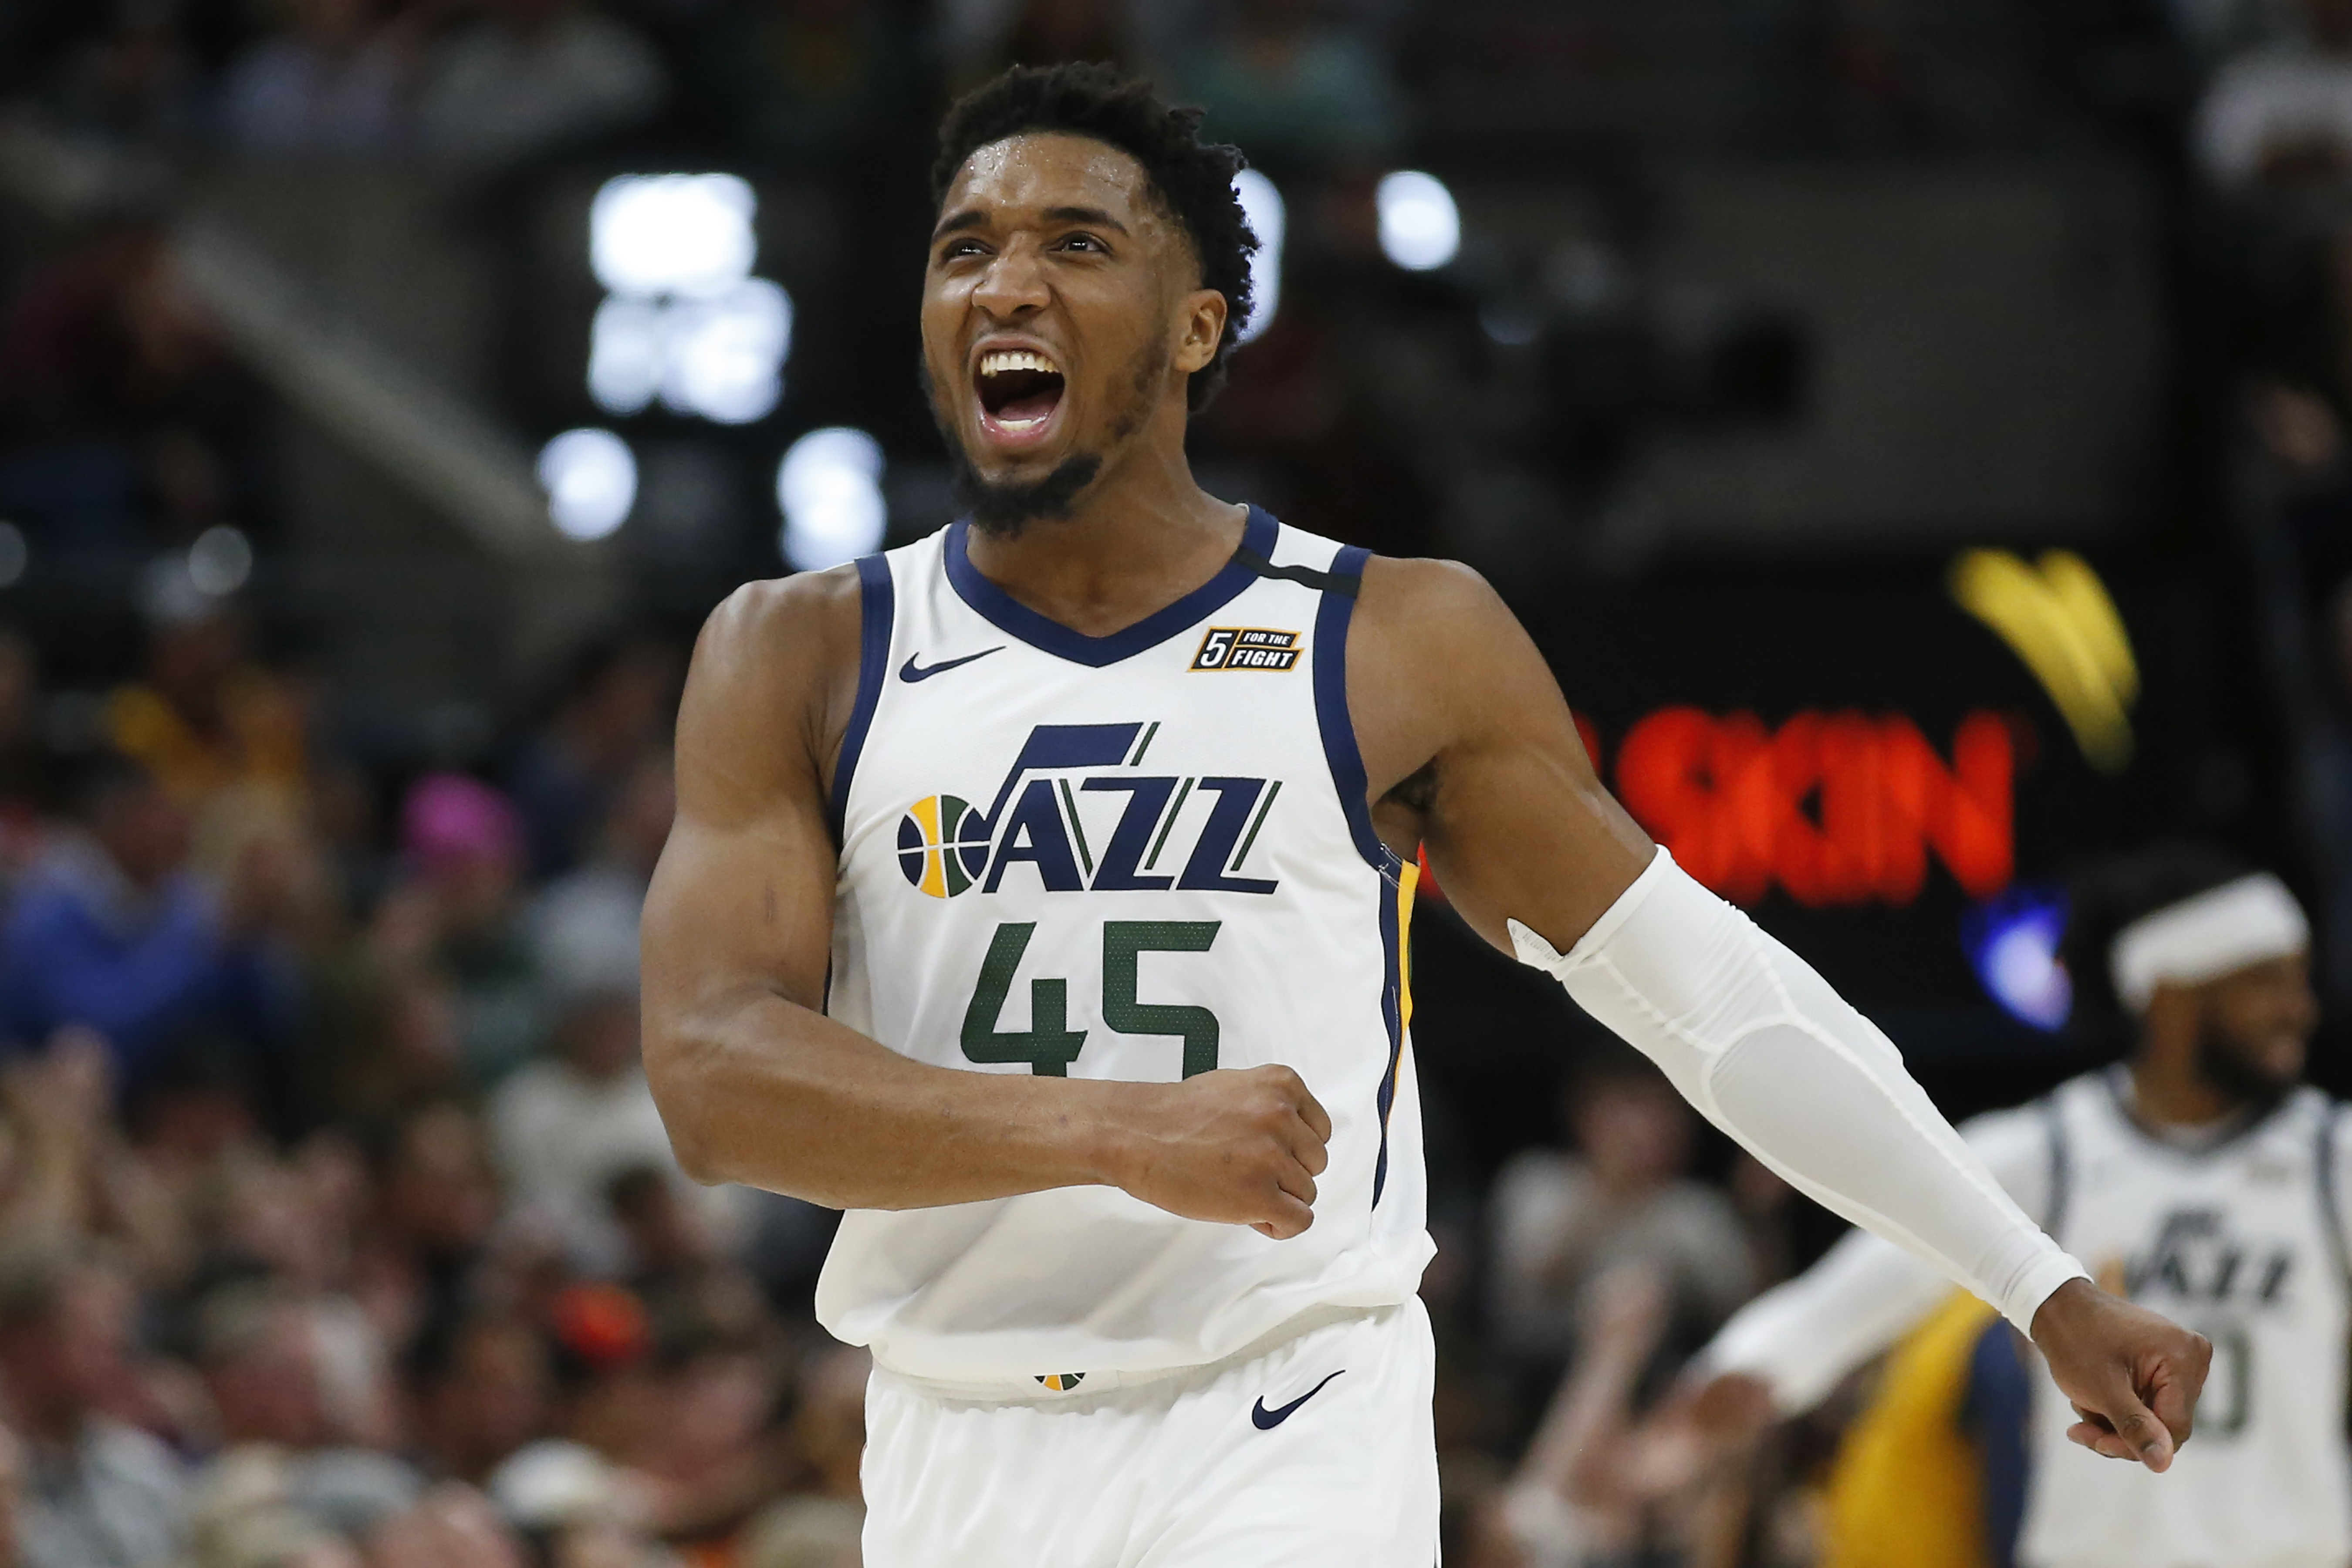 Donovan Mitchell returns to Cavaliers practice, likely to play